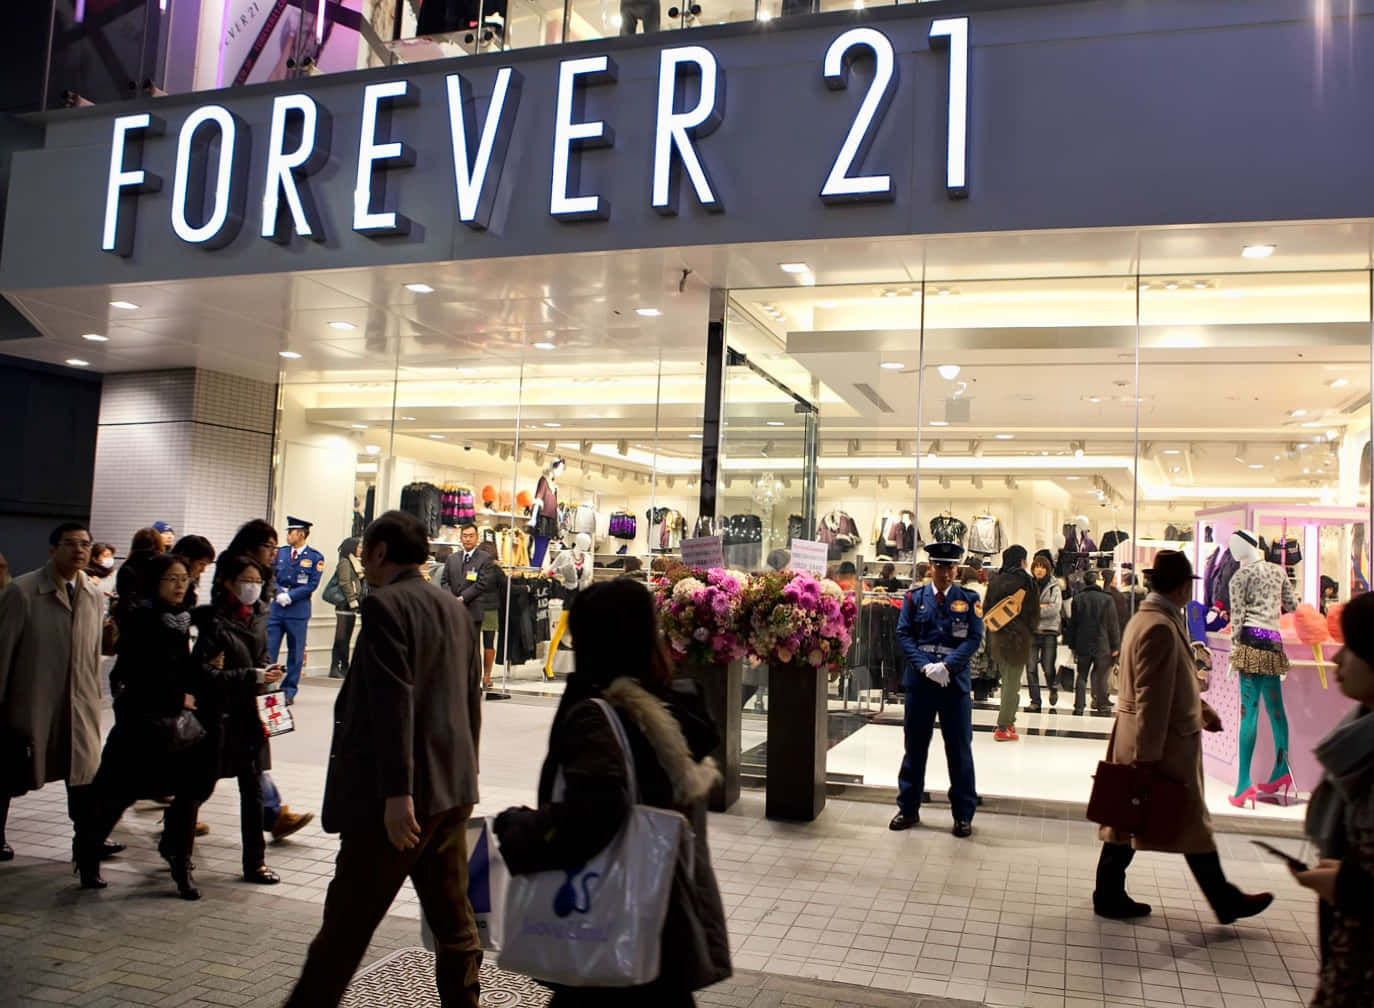 Get the latest fashion trends at Forever 21